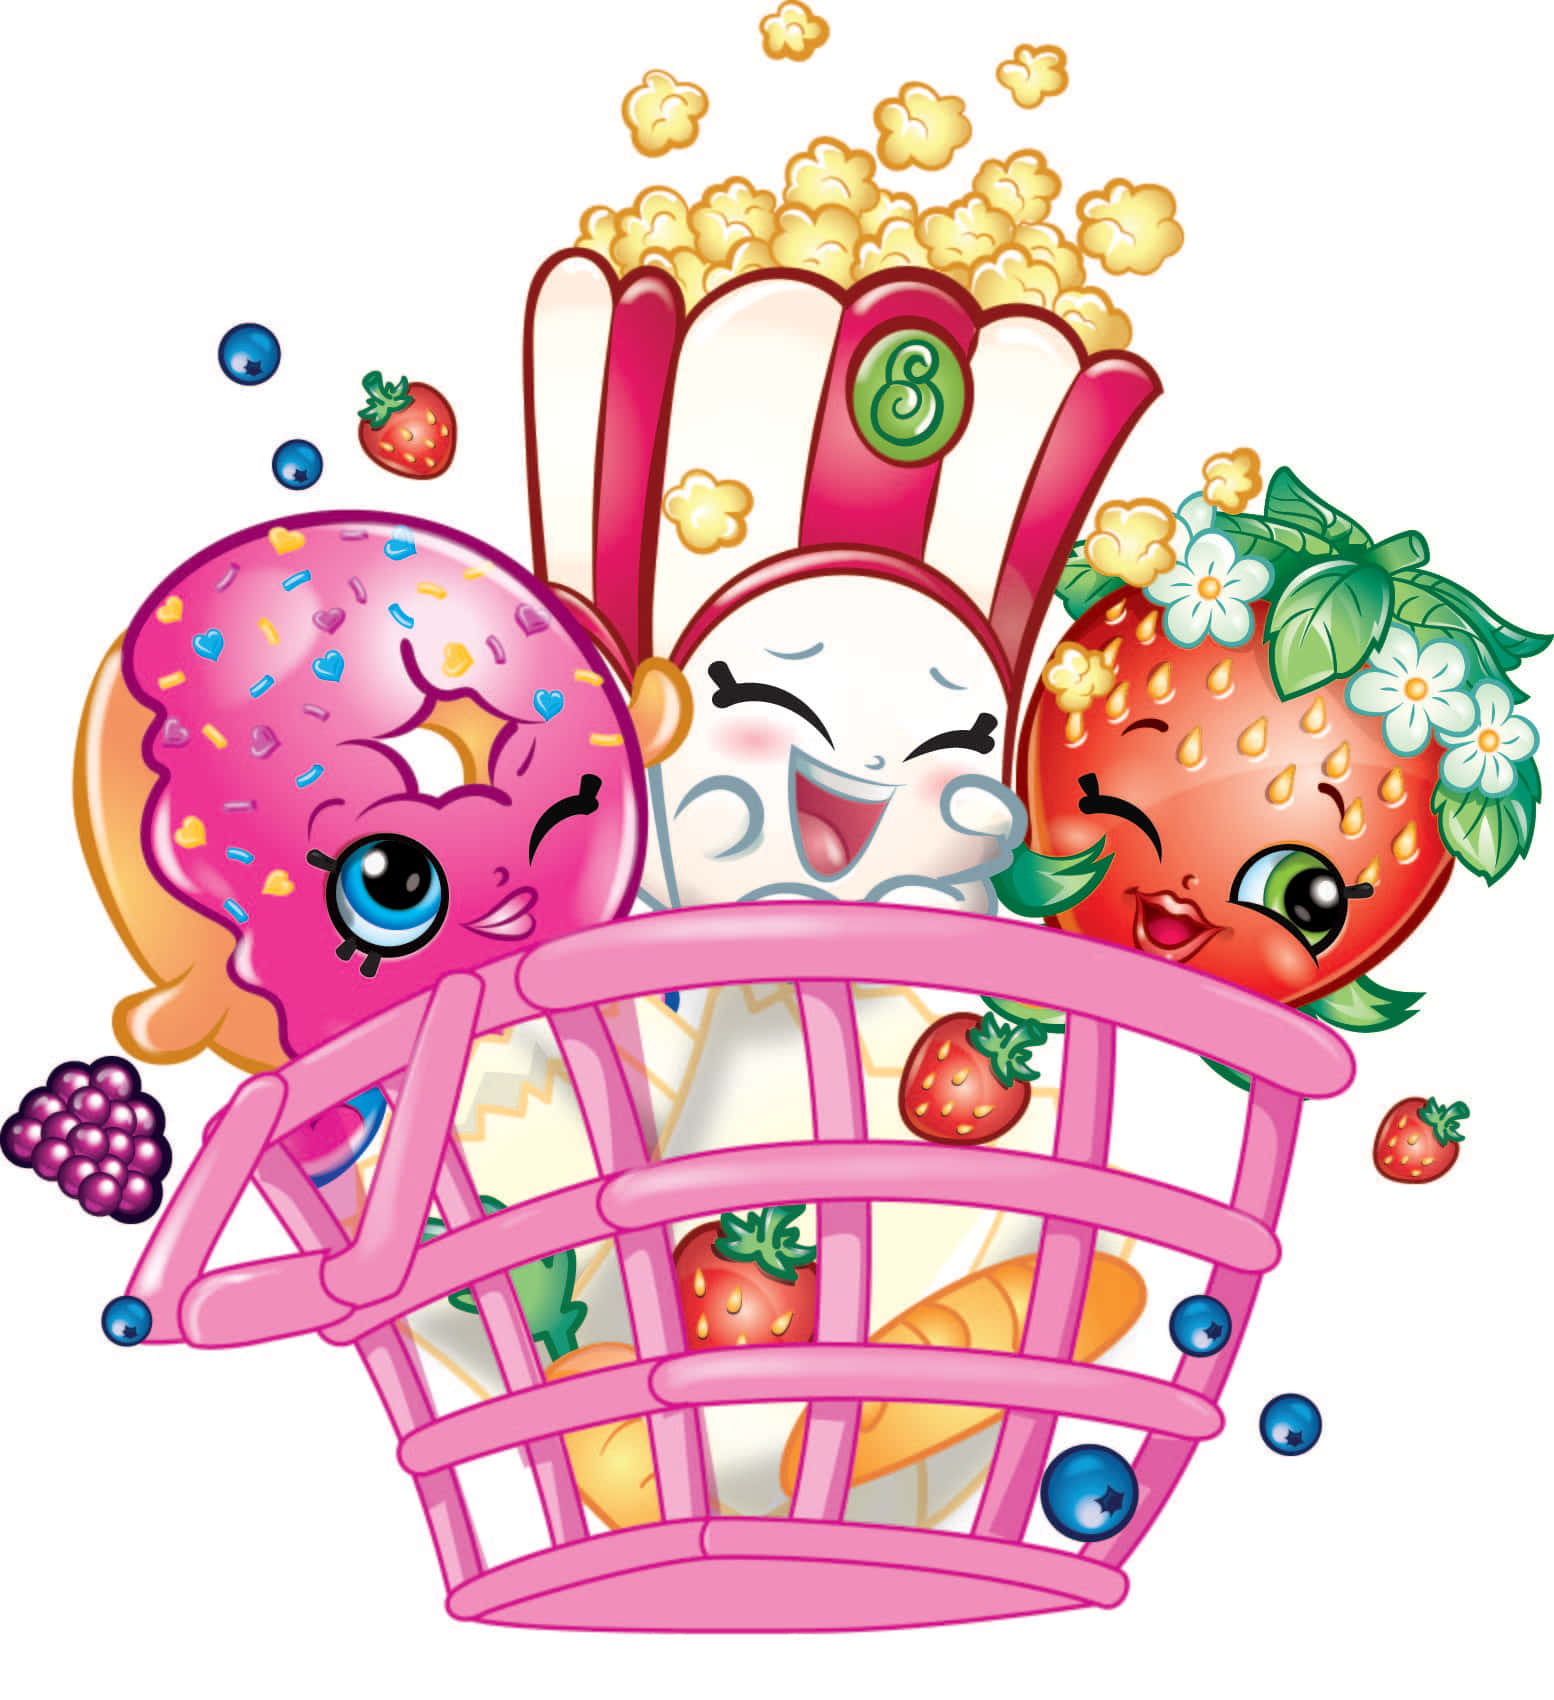 A group of fun and vibrant Shopkins characters